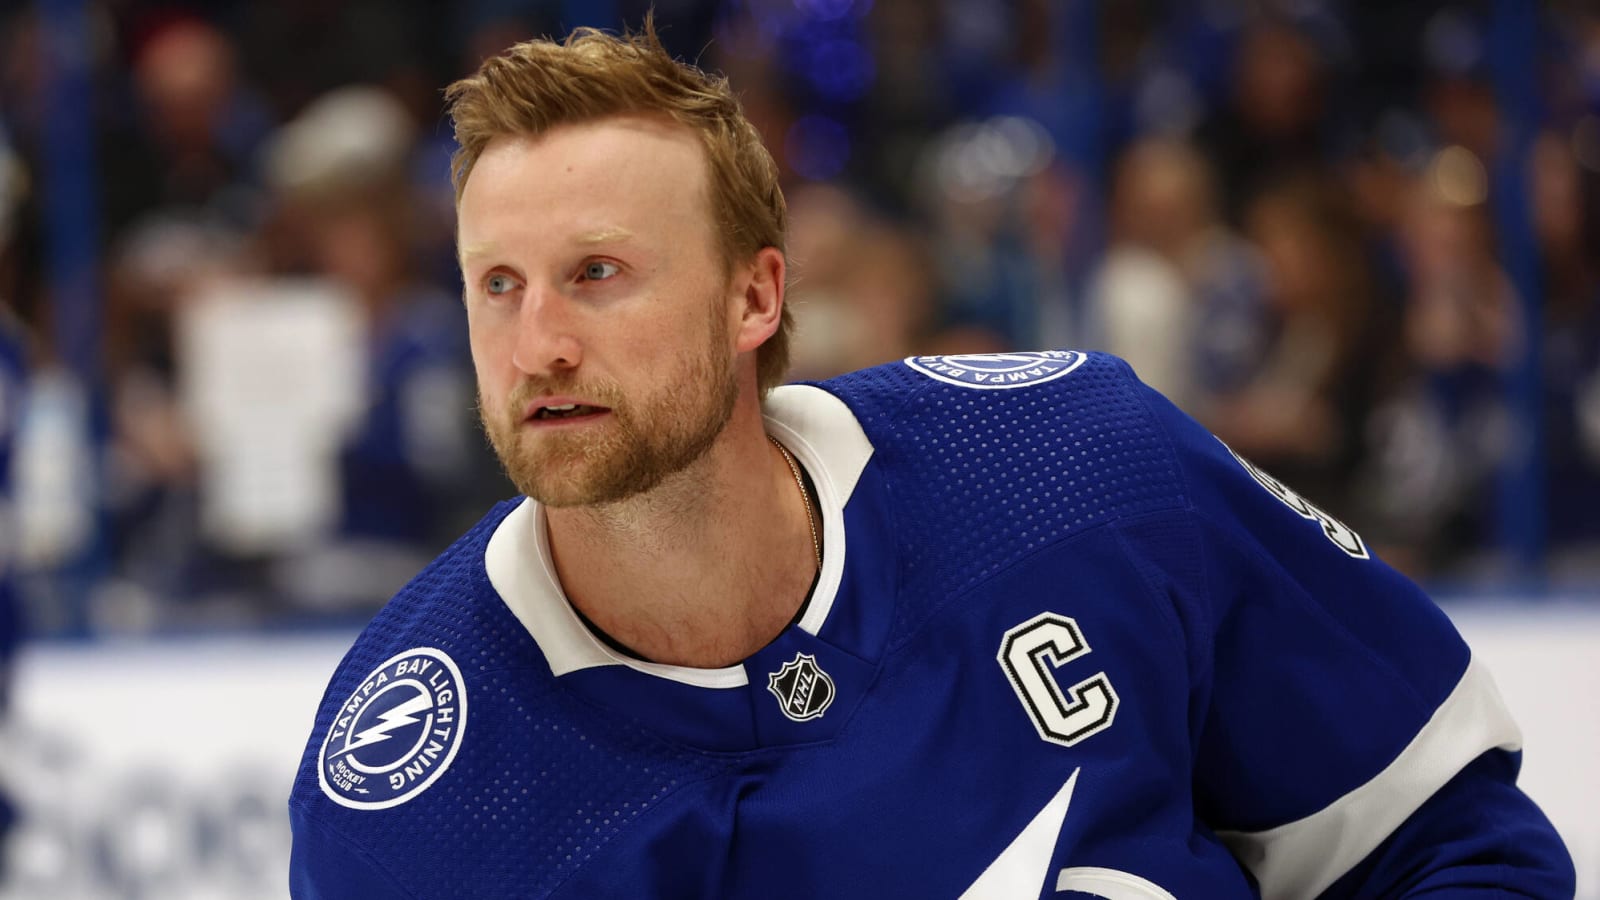 End of an Era if Steven Stamkos Played Final Game with Lightning